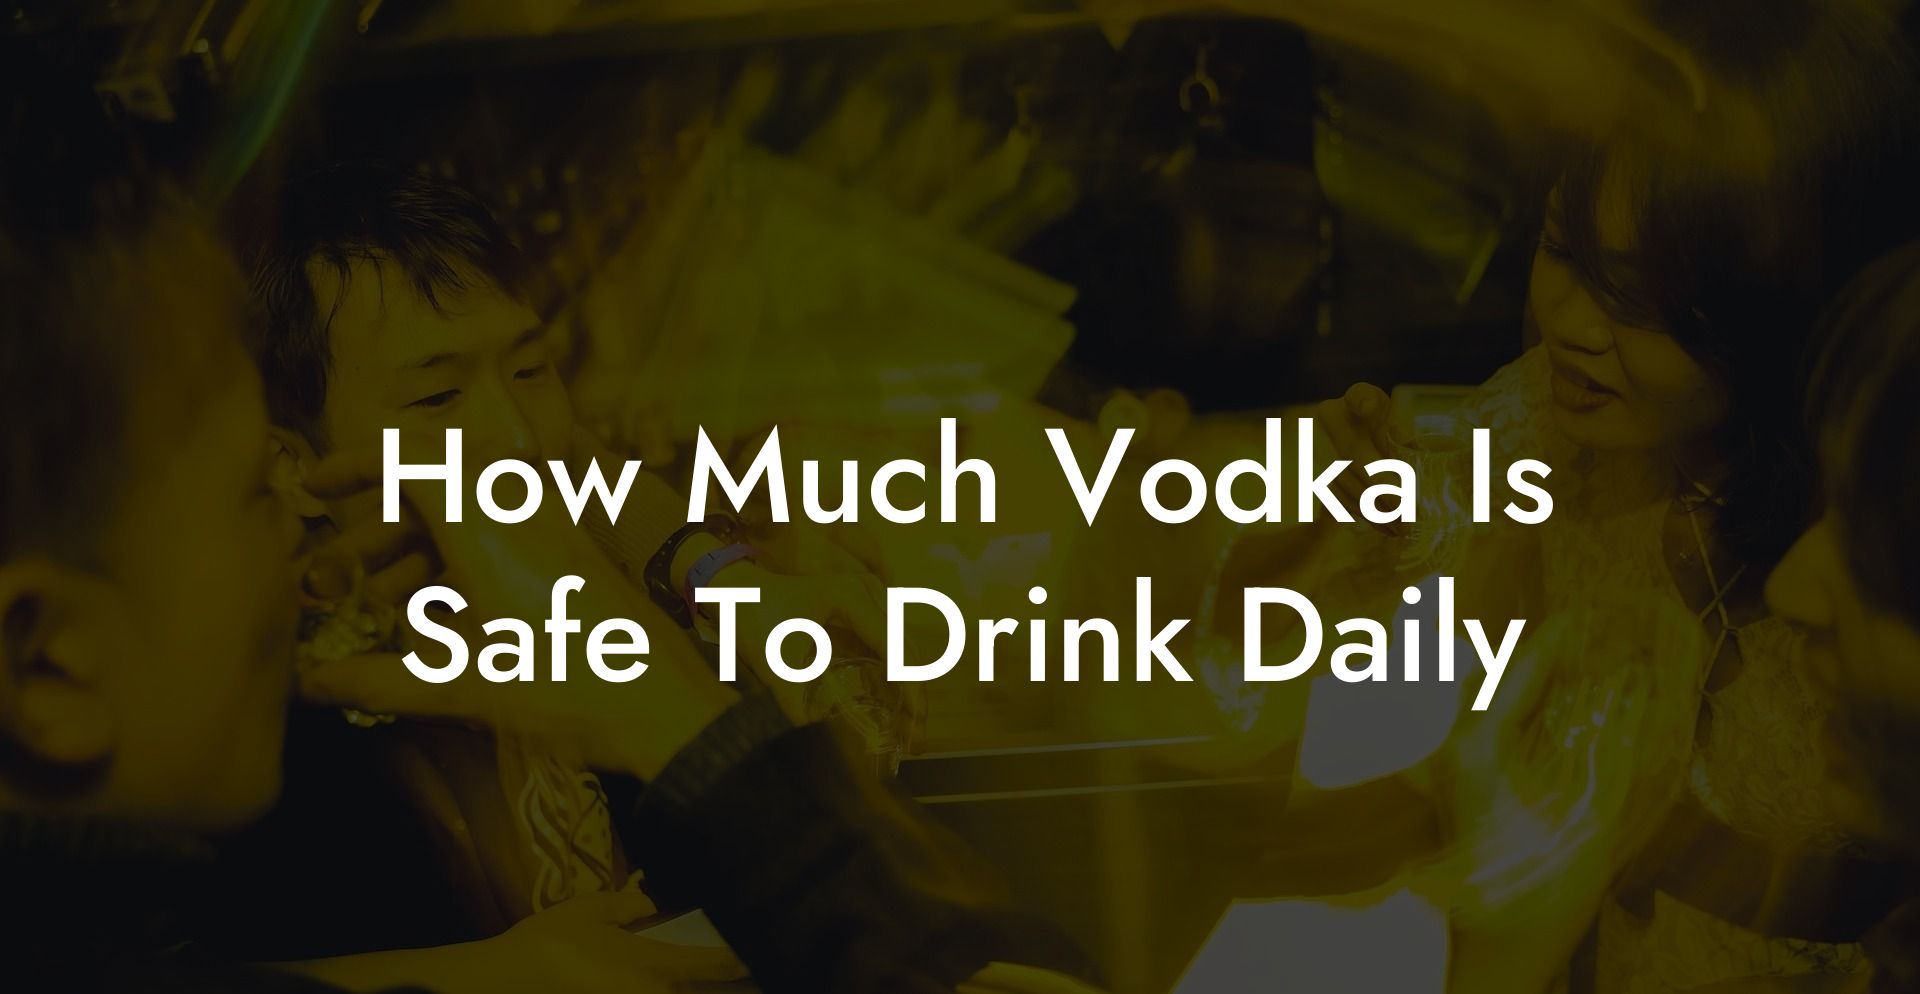 How Much Vodka Is Safe To Drink Daily